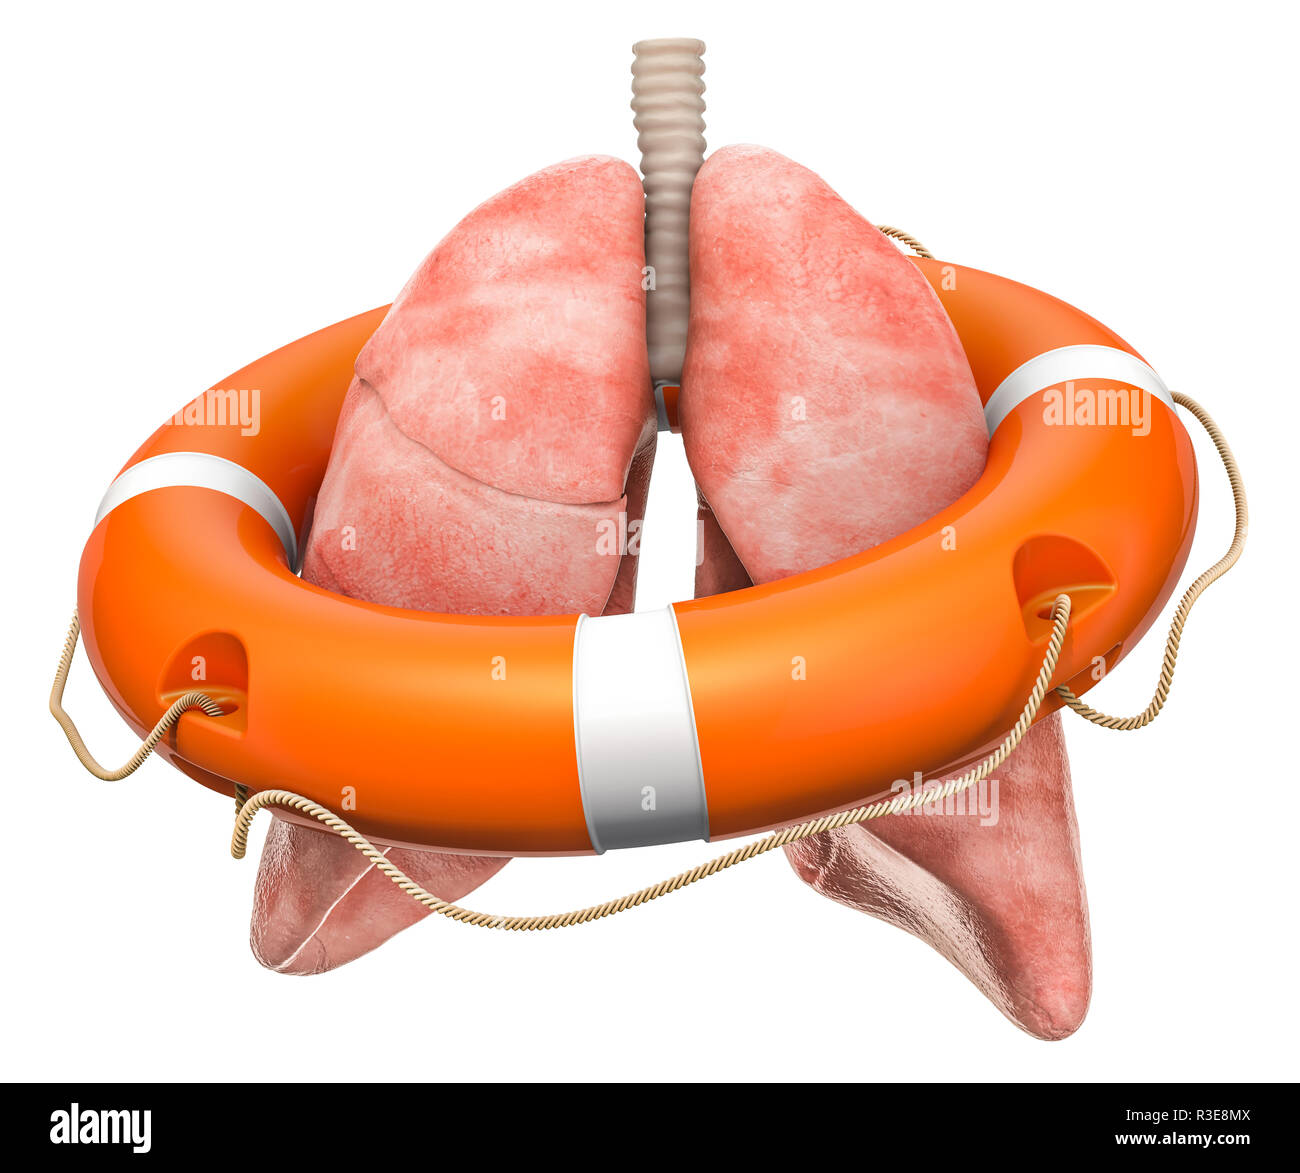 Human lungs with lifebelt, lungs protect concept. 3D rendering isolated on white background Stock Photo